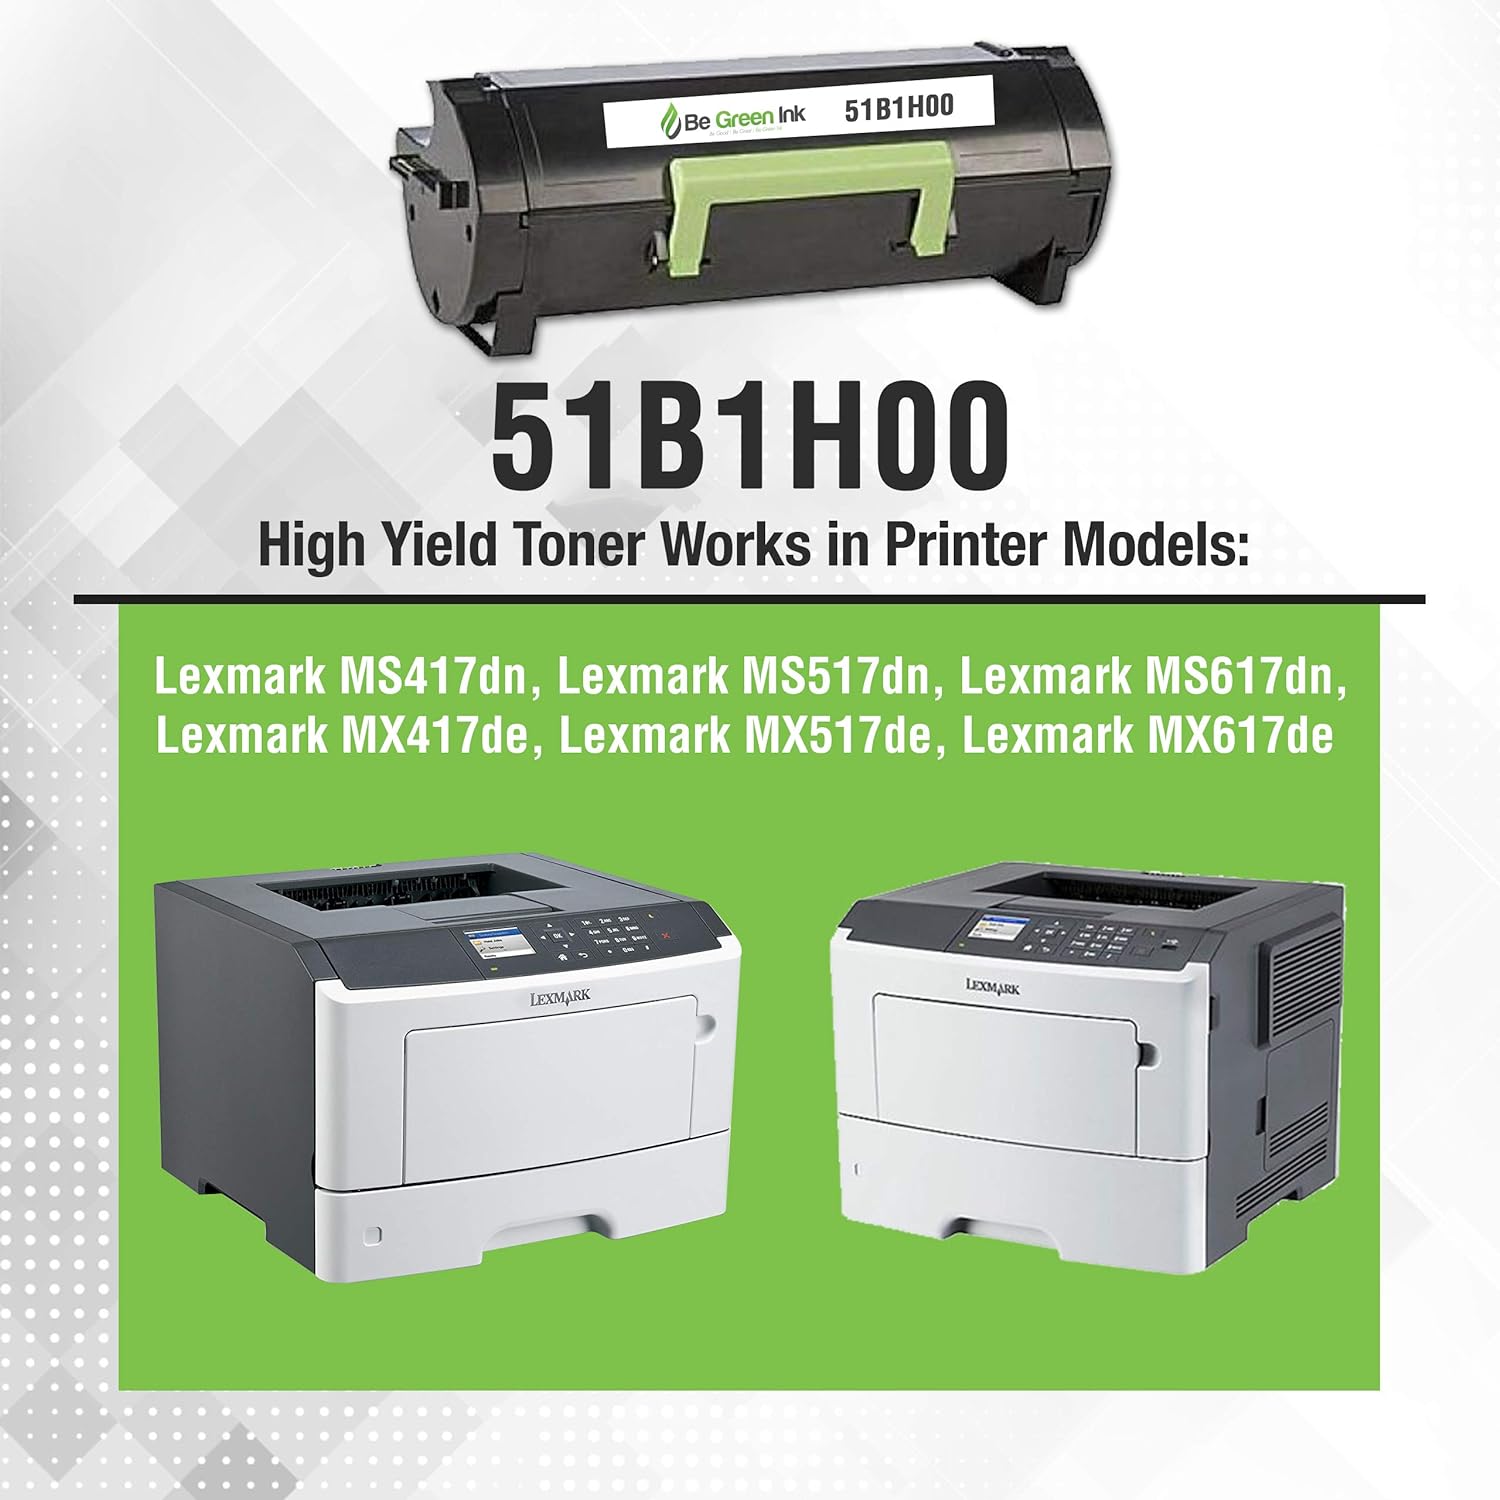 How to Extend Printing Life With Lexmark MC3224 Black Toner: 7 Clever Printer Tricks You Never Thought Of